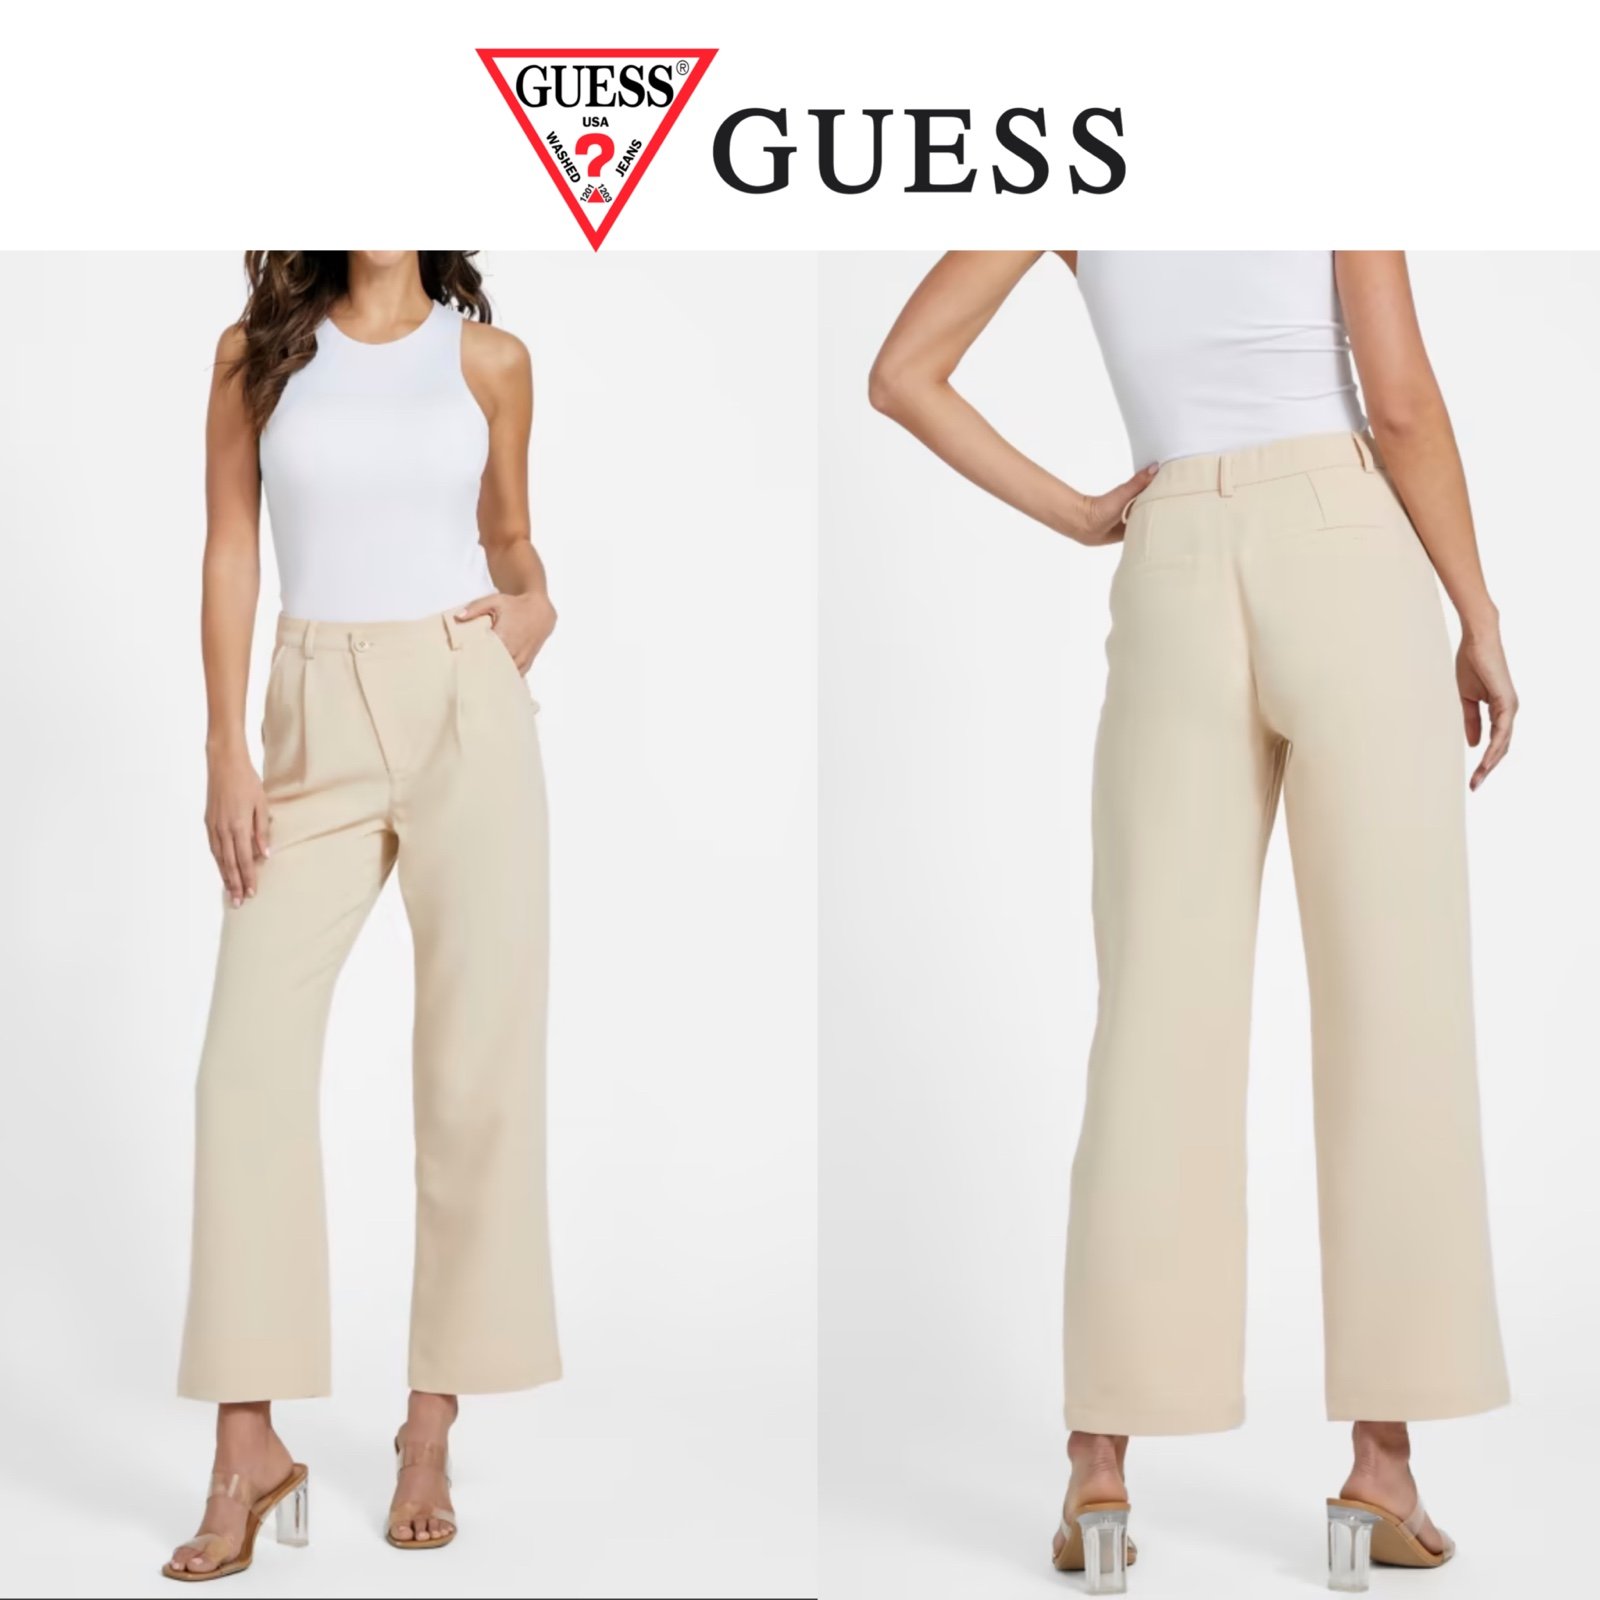 Affordable Guess Maya Crossover Waist Pants kXAil3tW3 Z